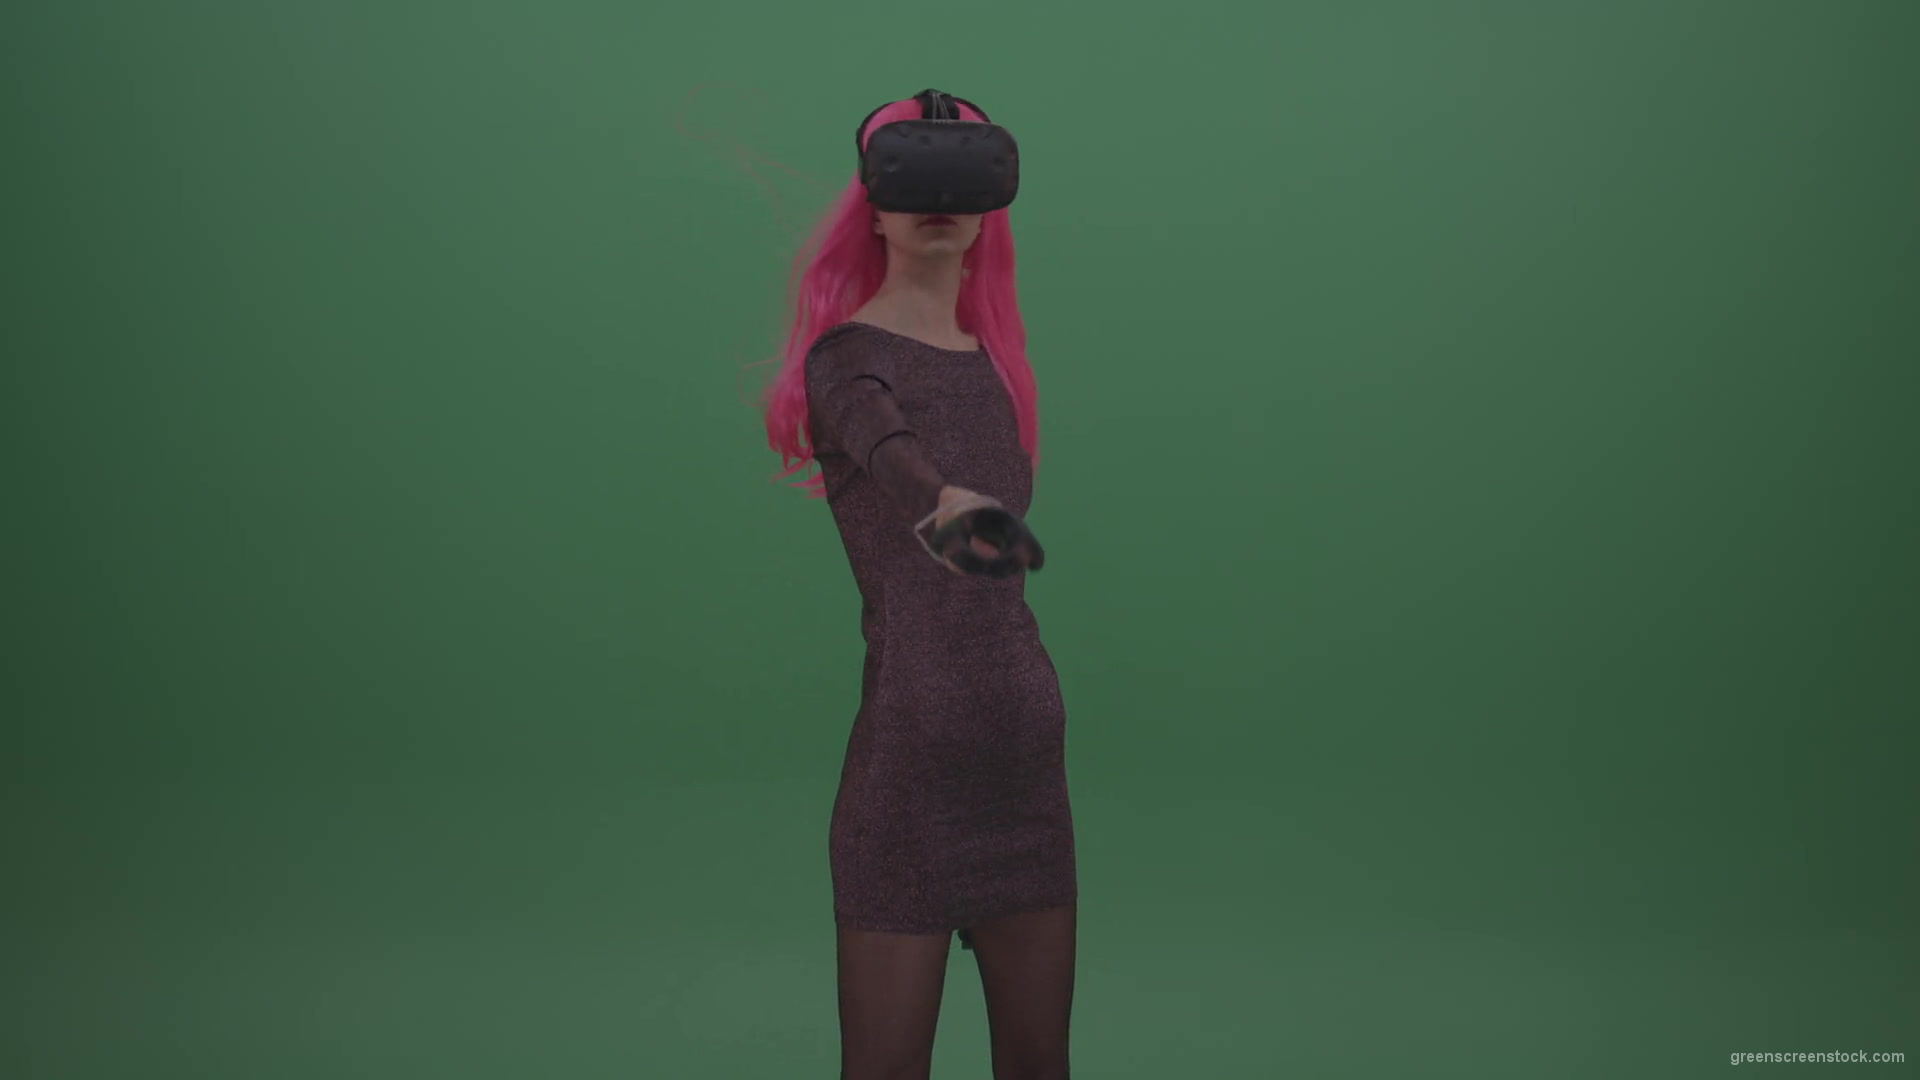 Pink_Hair_Young_Japanese_Anime_Rock_Girl_Shooting_Enemies_In_Virtual_Reality_Game_Heavy_Wind_Weather_Green_Screen_Wall_Background-1920_008 Green Screen Stock